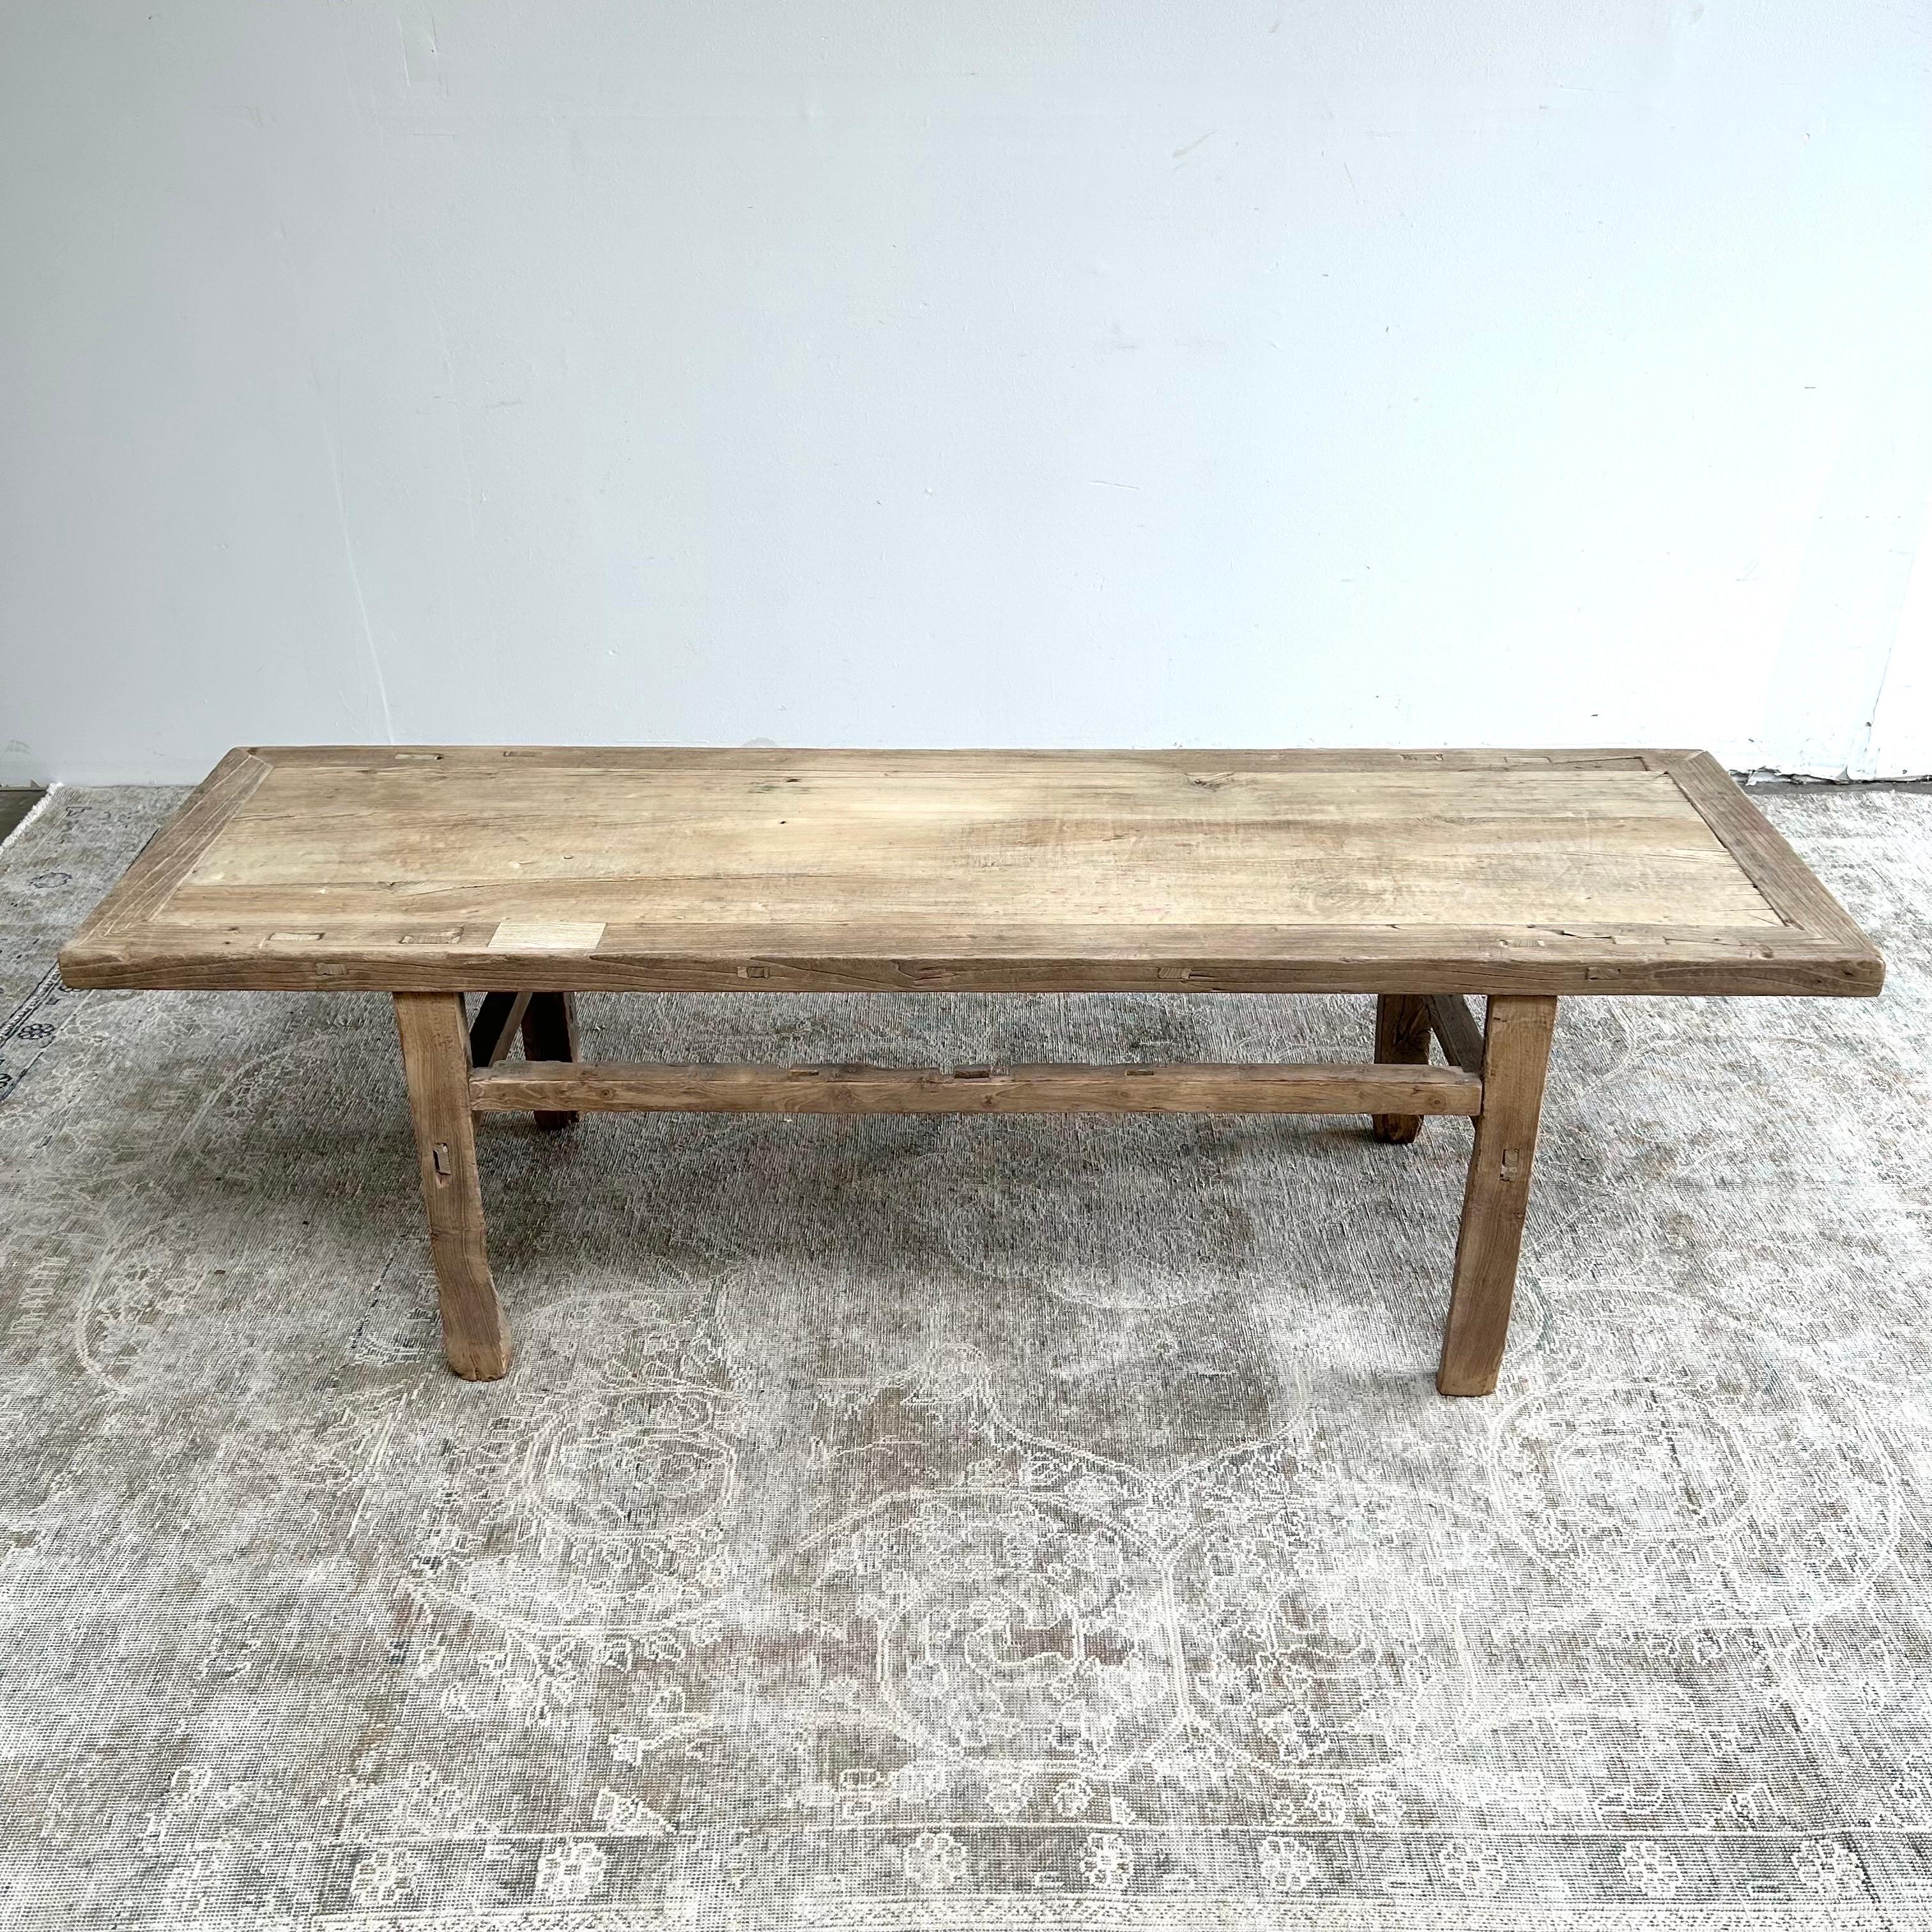 Elm coffee table 75”w x 22”d x 23”h
Vintage elm wood coffee table Solid and sturdy, ready for everyday use. Beautiful rustic patina, looks to once have been a door by looking at the underside. Repurposed into a coffee table or bench.
